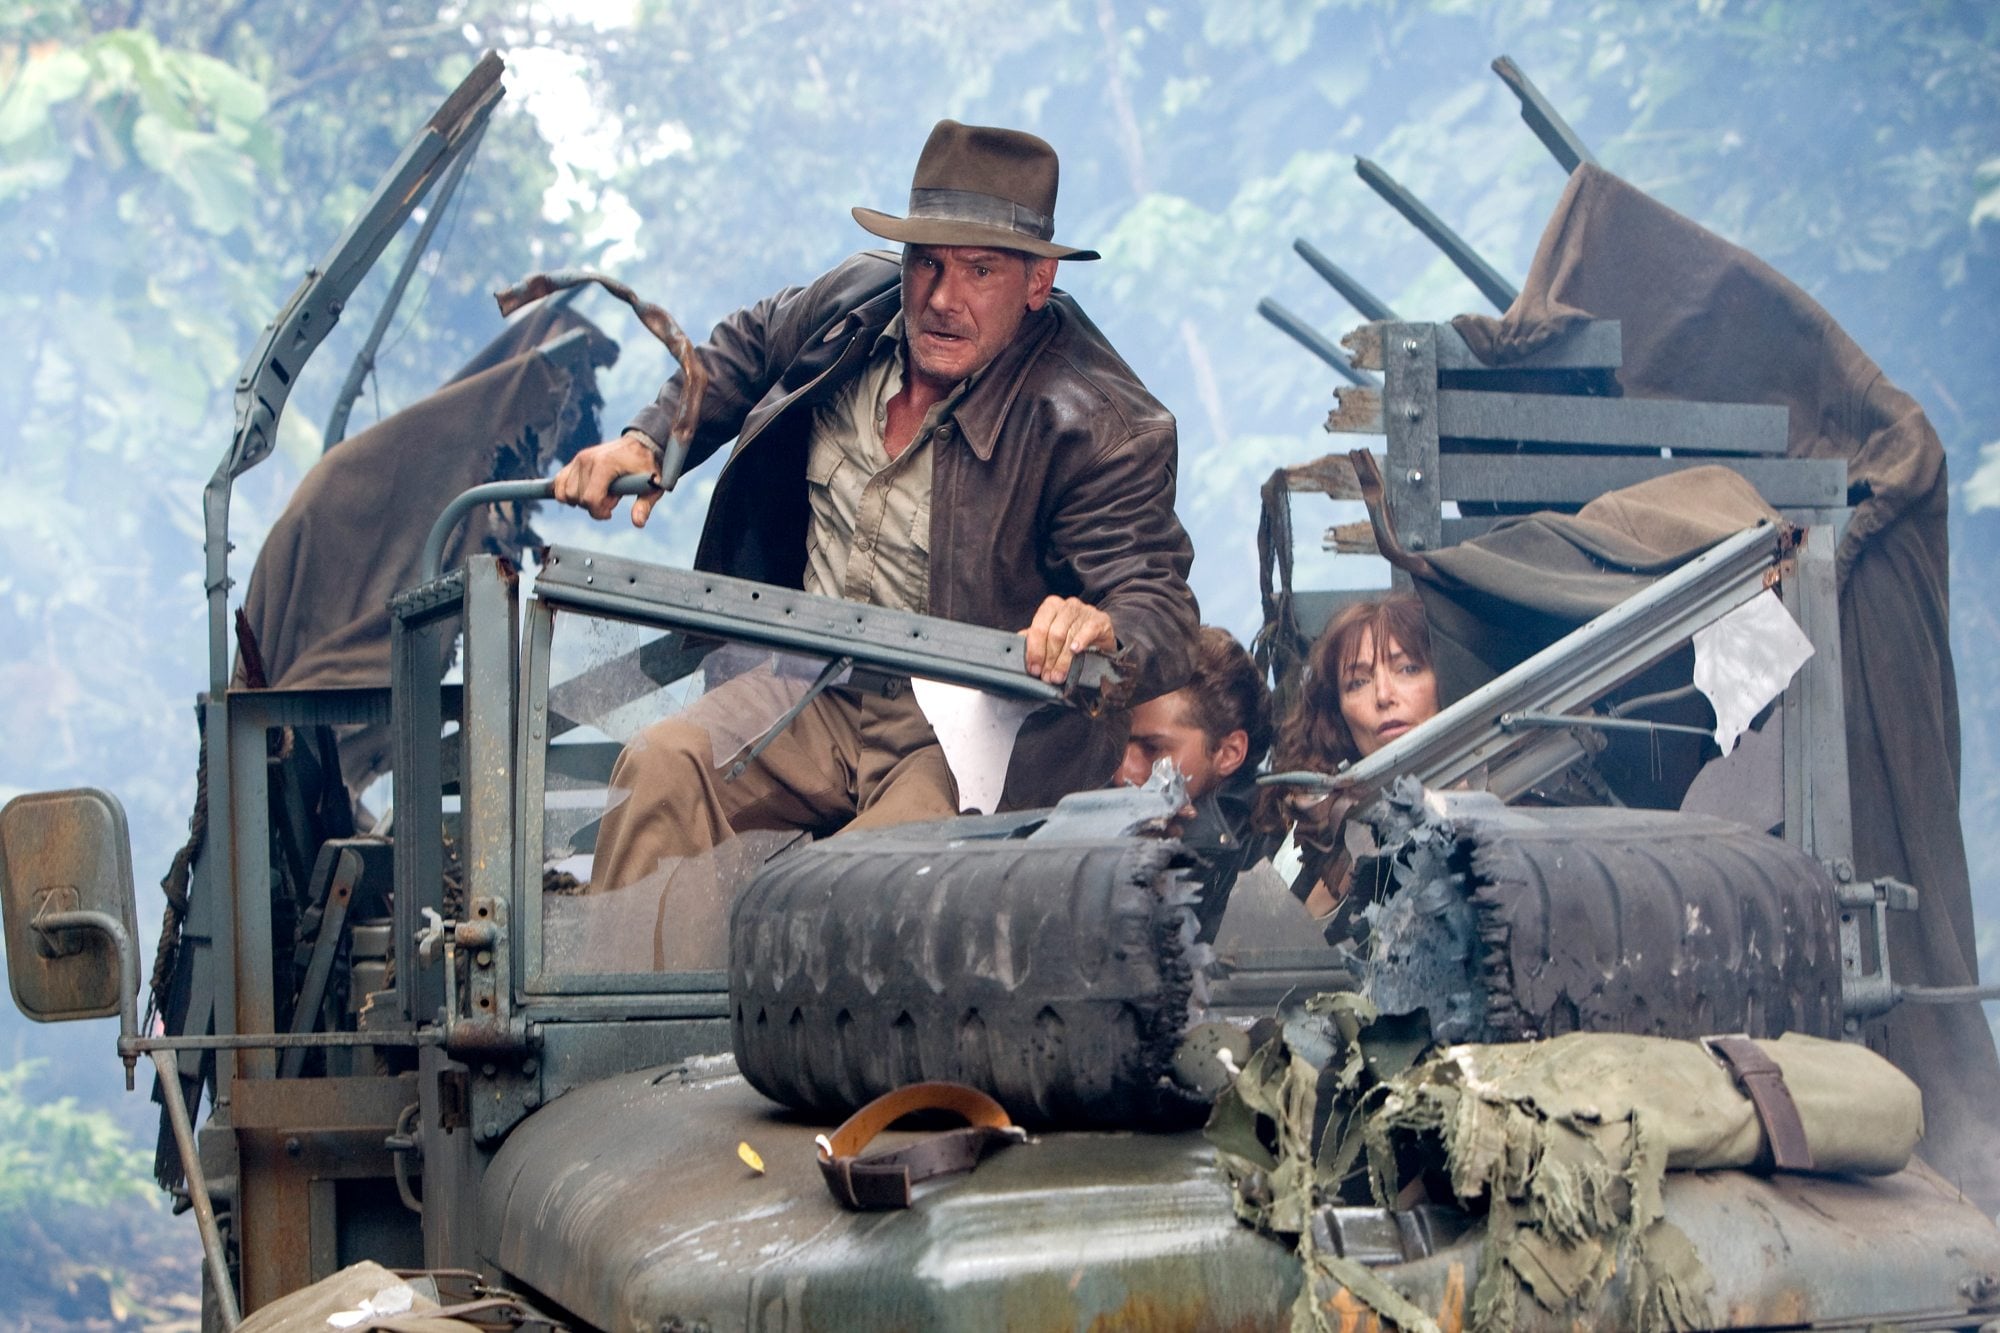 Harrison Ford starred as Indiana Jones in 2008's "Indiana Jones and the Kingdom of the Crystal Skull." Ford will star in a fifth Indiana Jones movie.